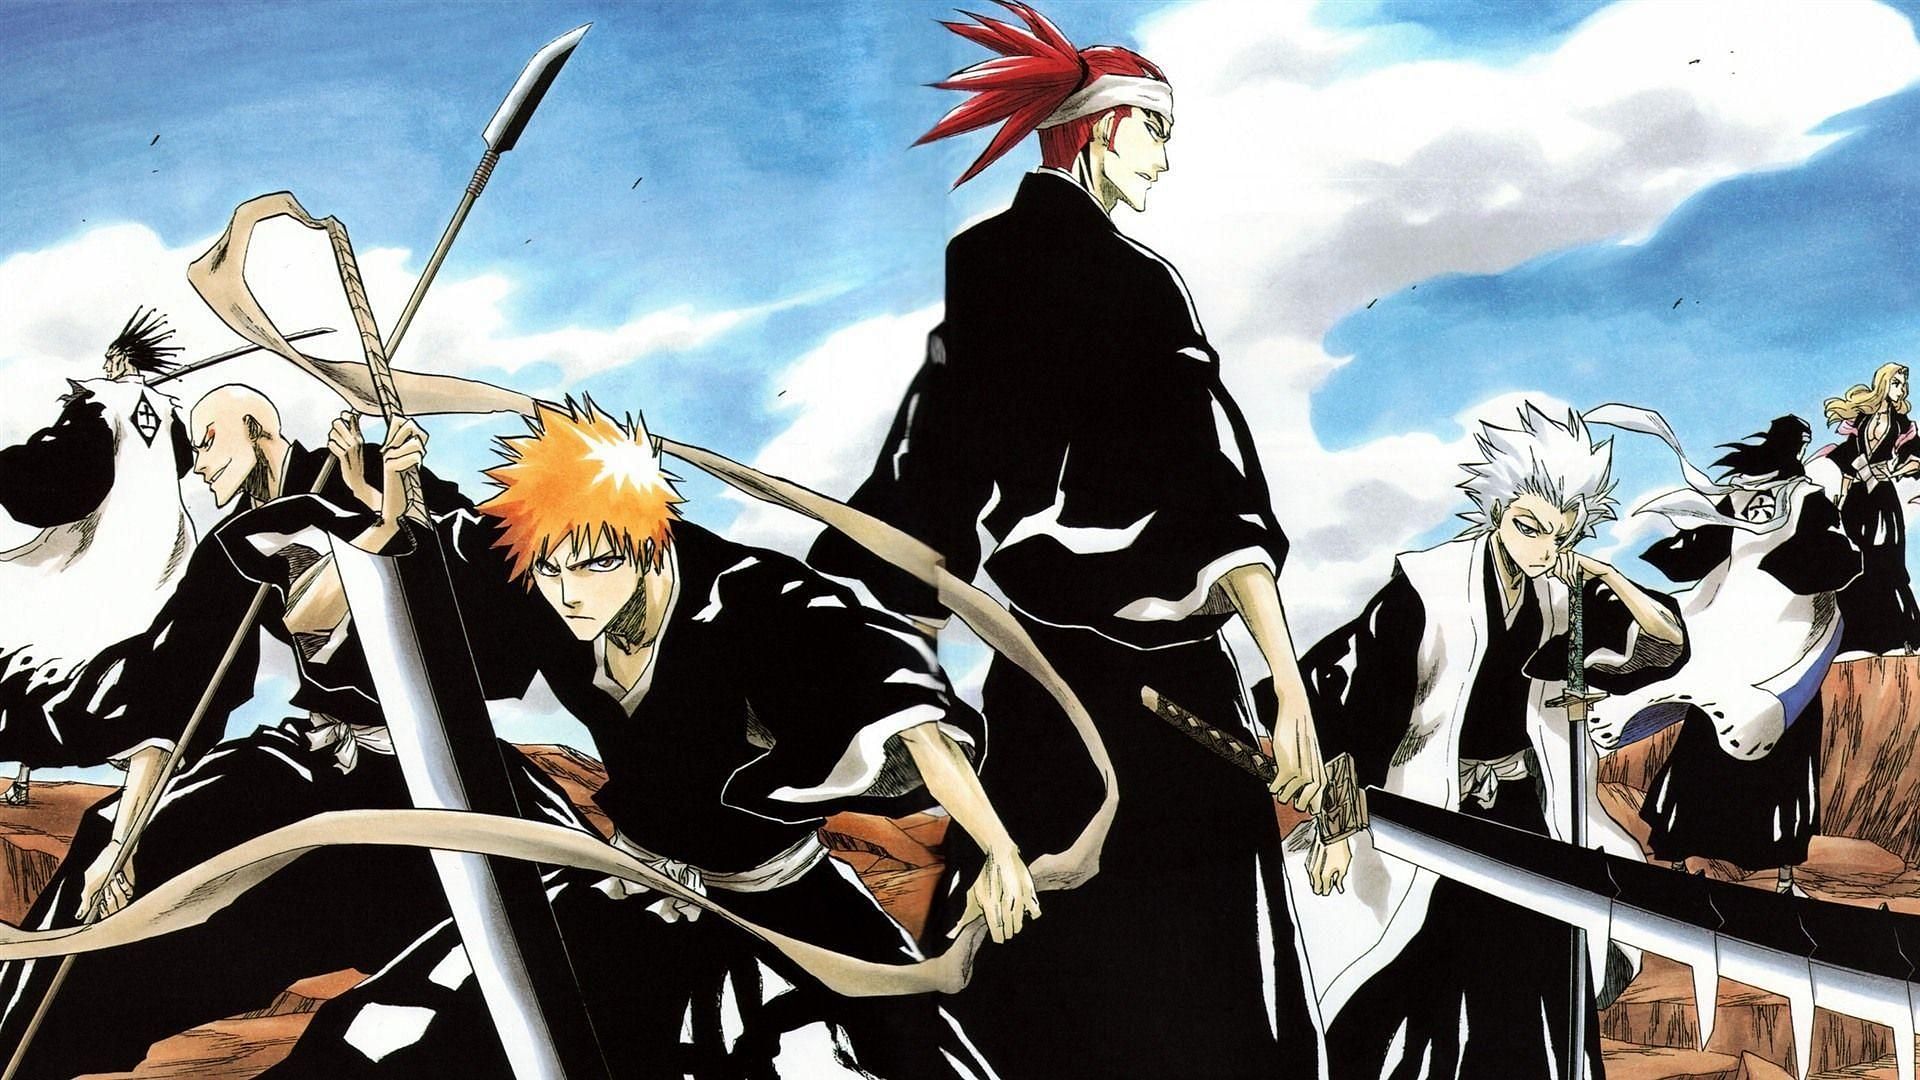 All Bleach Episodes Removed From Crunchyroll - Disney Got The